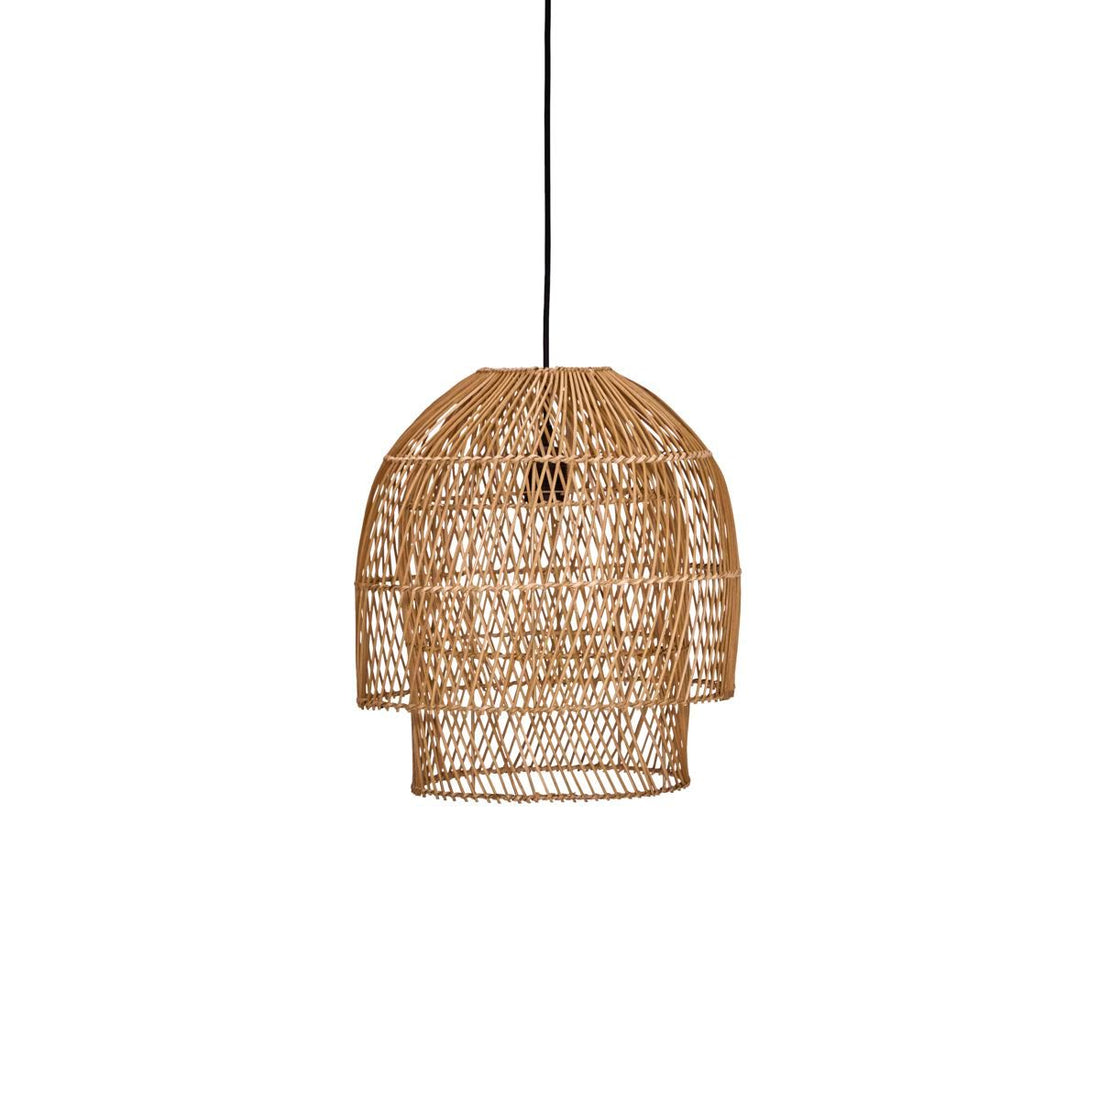 House Doctor Lampshade, Hdgetti, Natural